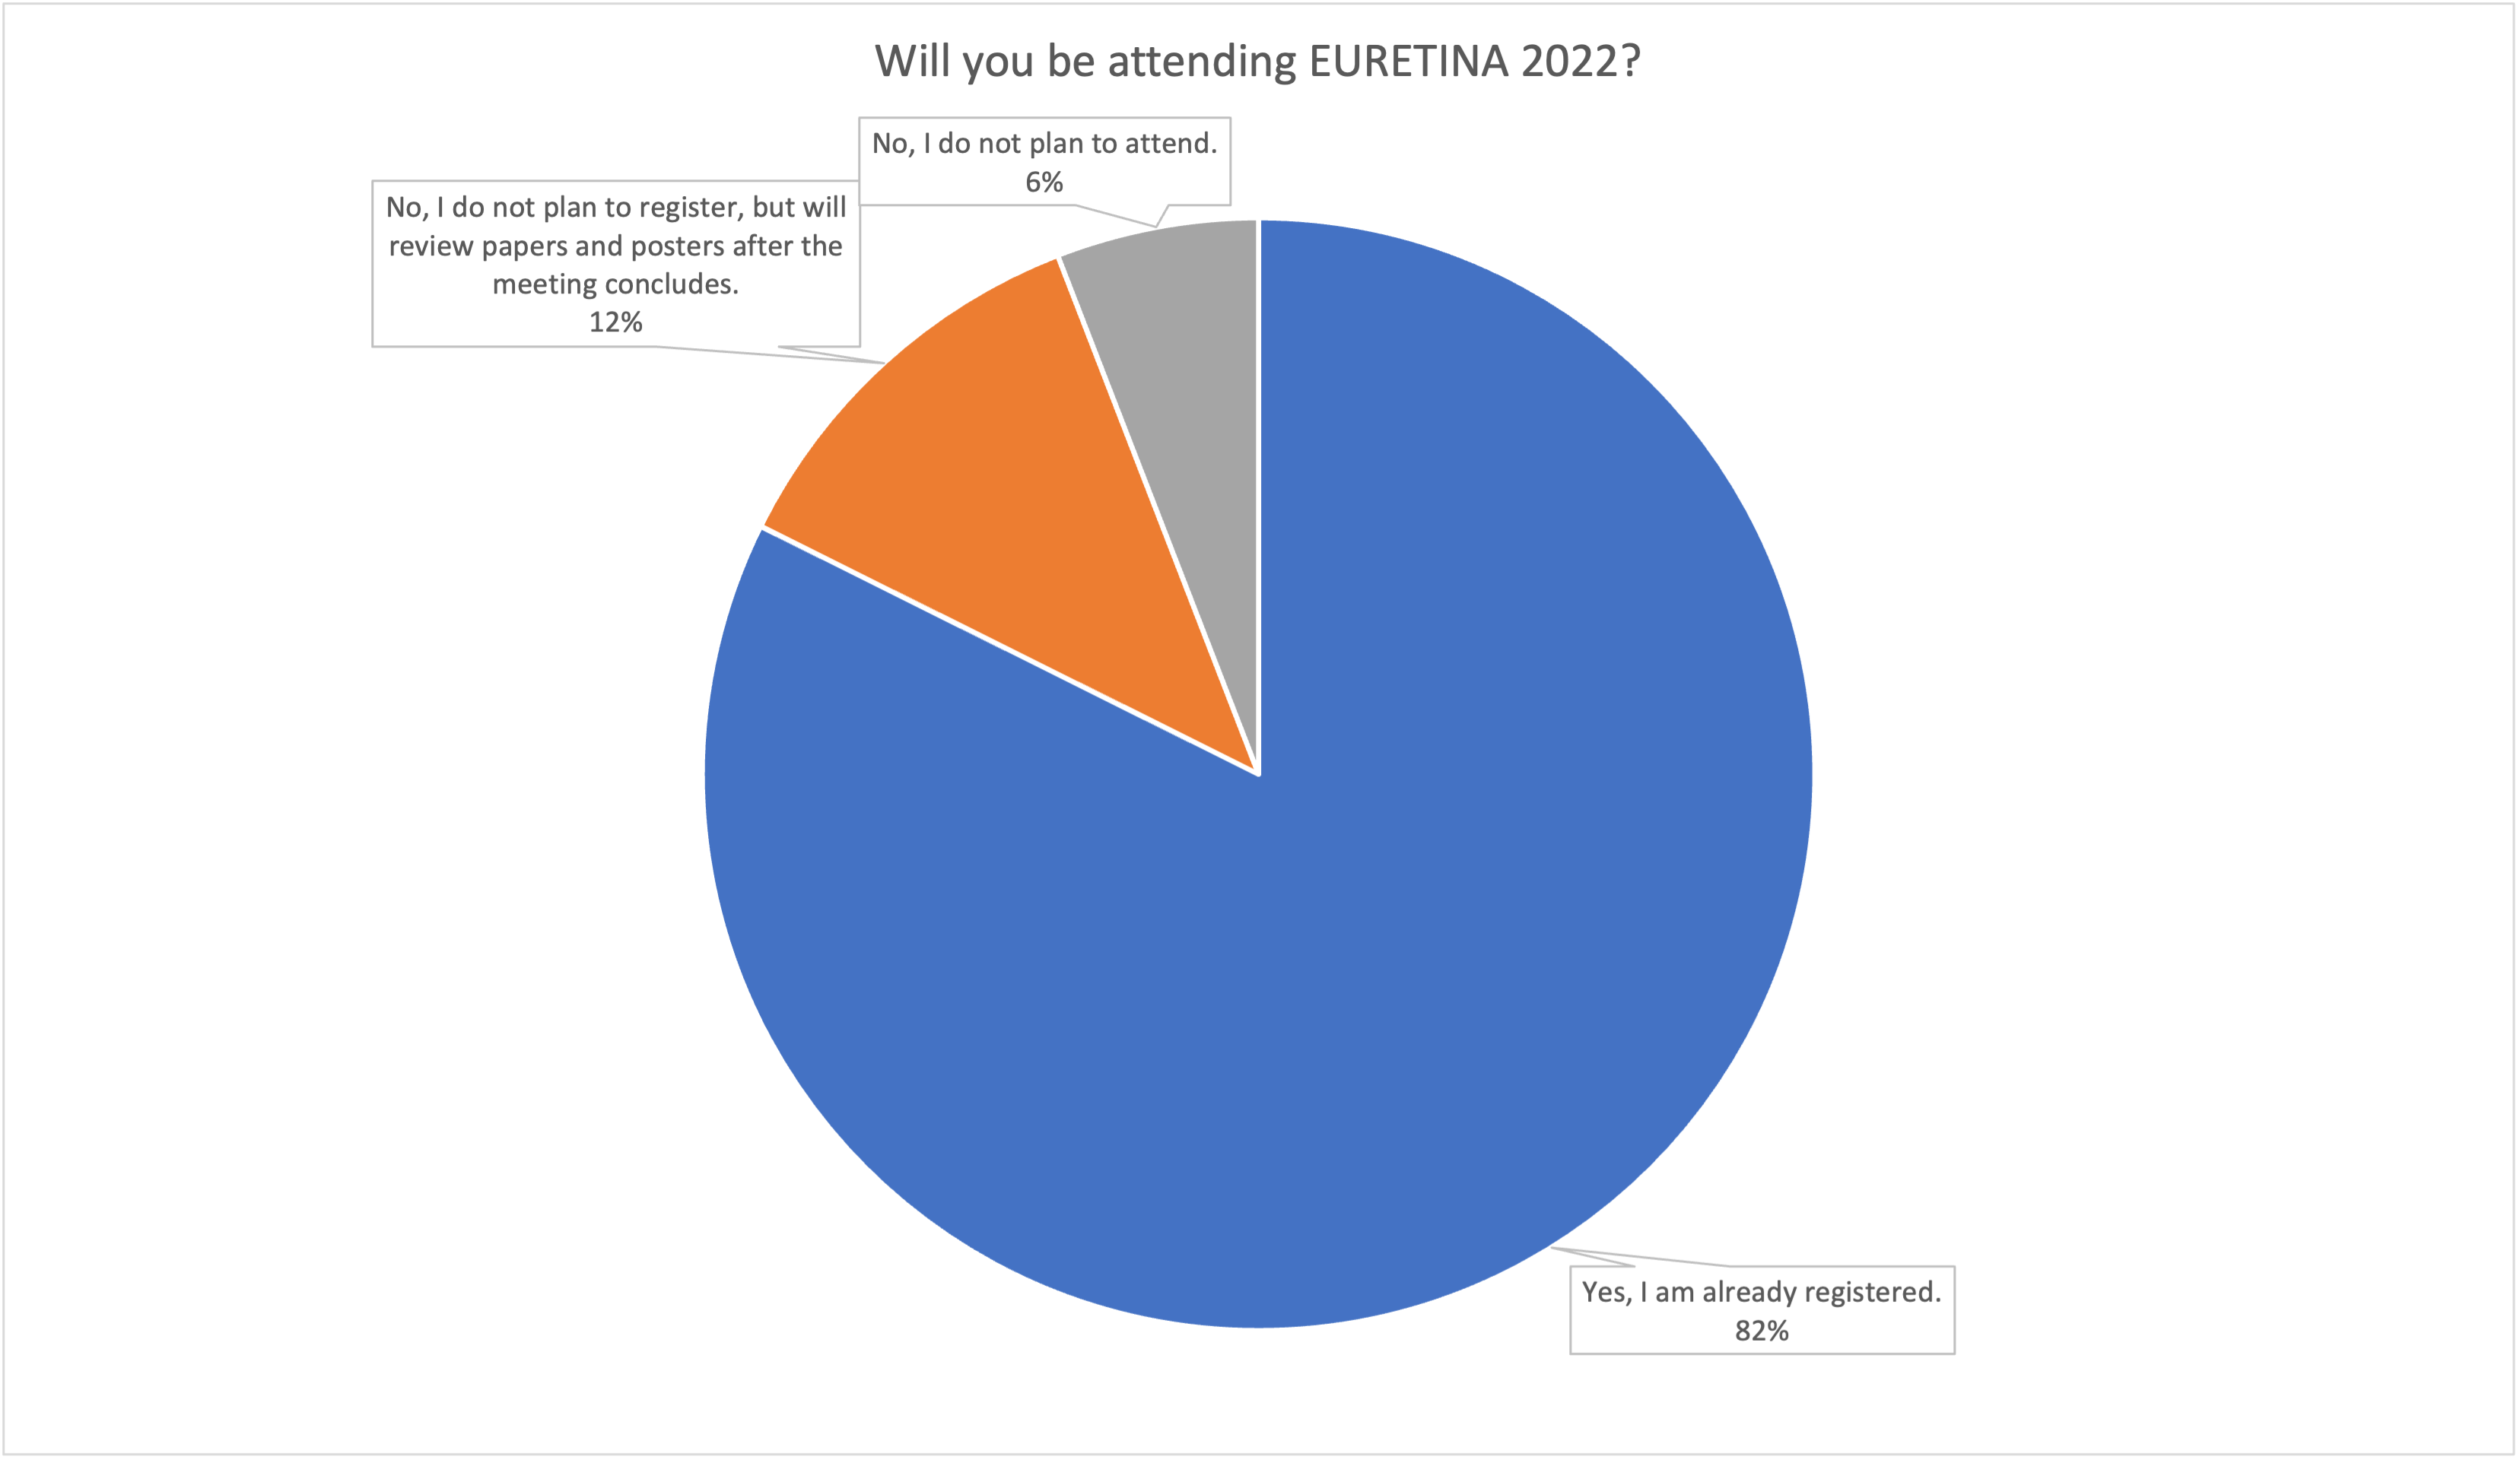  Poll results: Will you be attending EURETINA 2022?